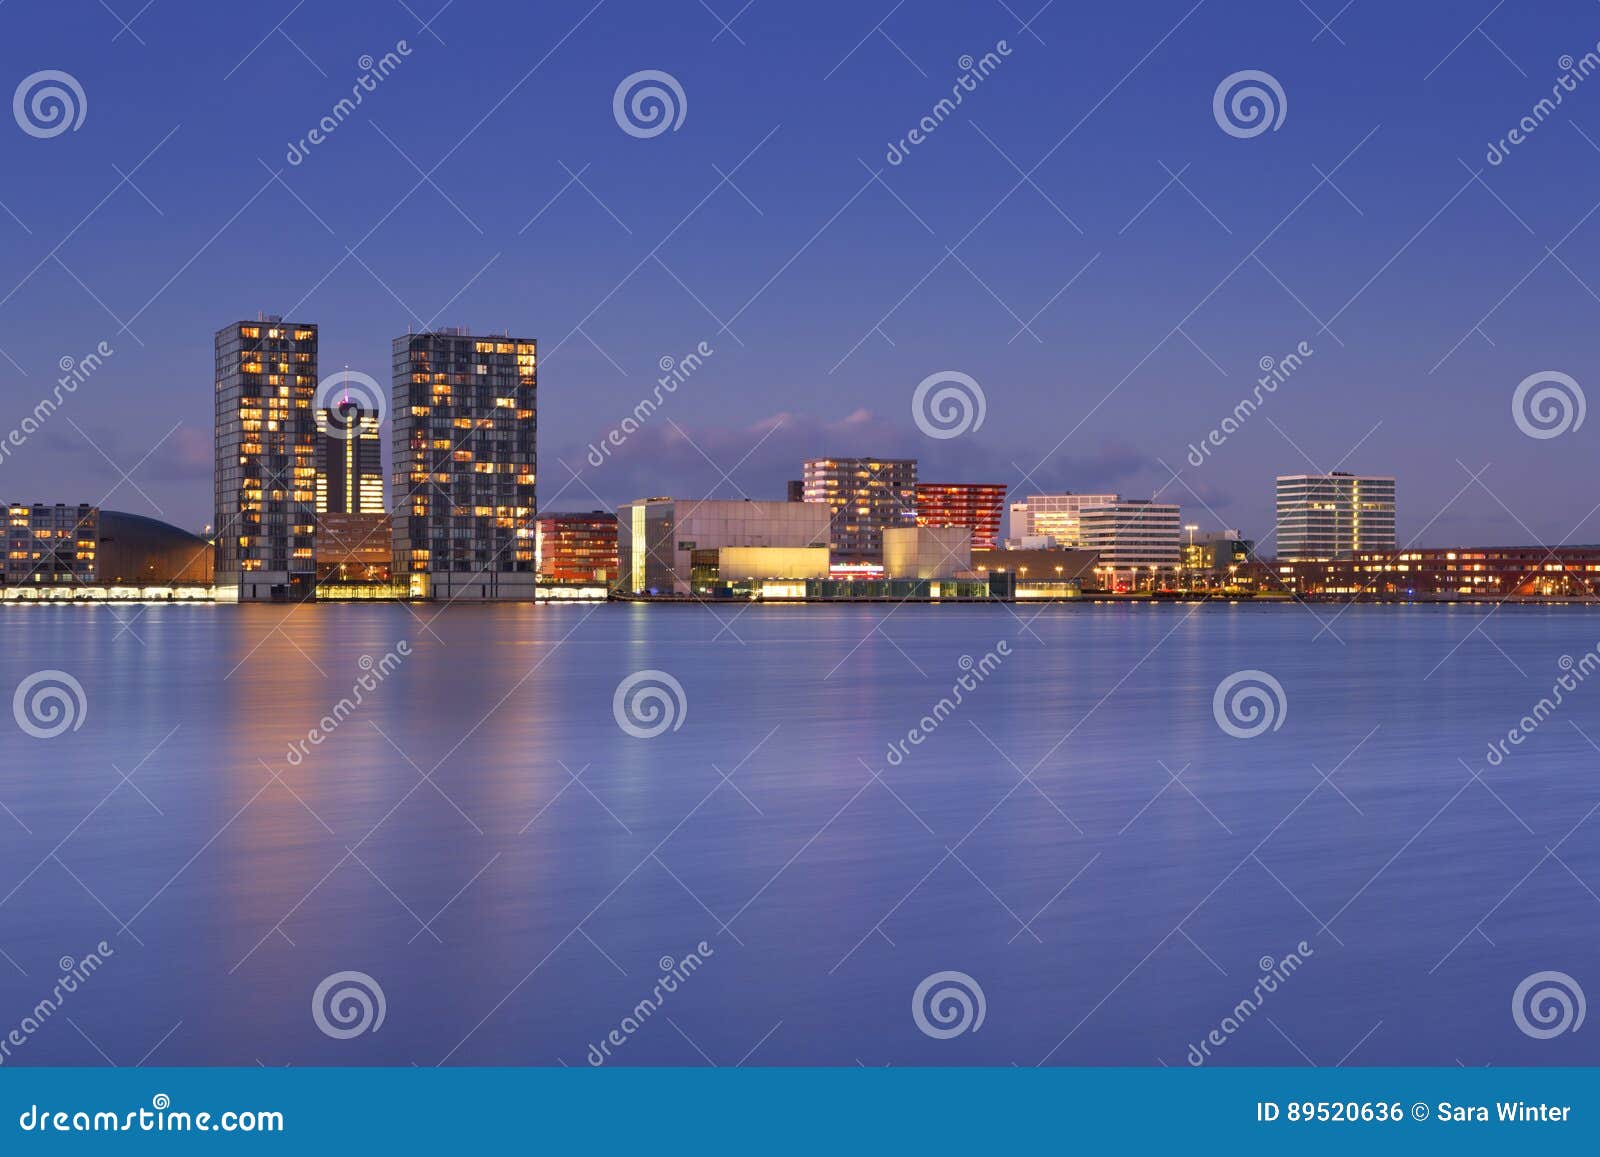 skyline of the city of almere in the netherlands